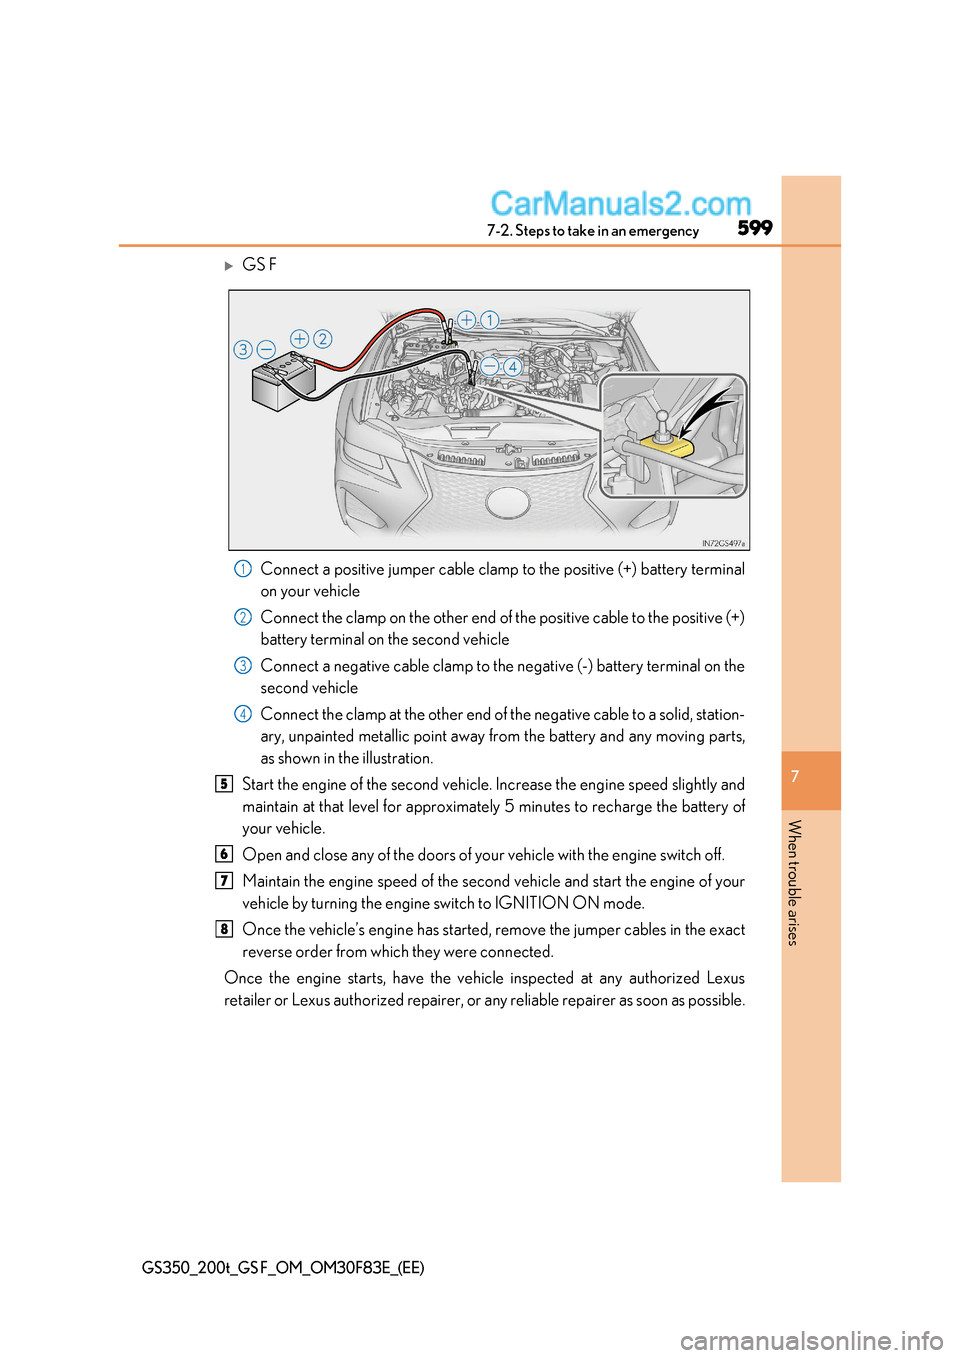 Lexus GS F 2017  Owners Manual 599
7-2. Steps to take in an emergency
7
When trouble arises
GS350_200t_GS F_OM_OM30F83E_(EE)
GS F
Connect a positive jumper cable clamp  to the positive (+) battery terminal
on your vehicle 
Conne